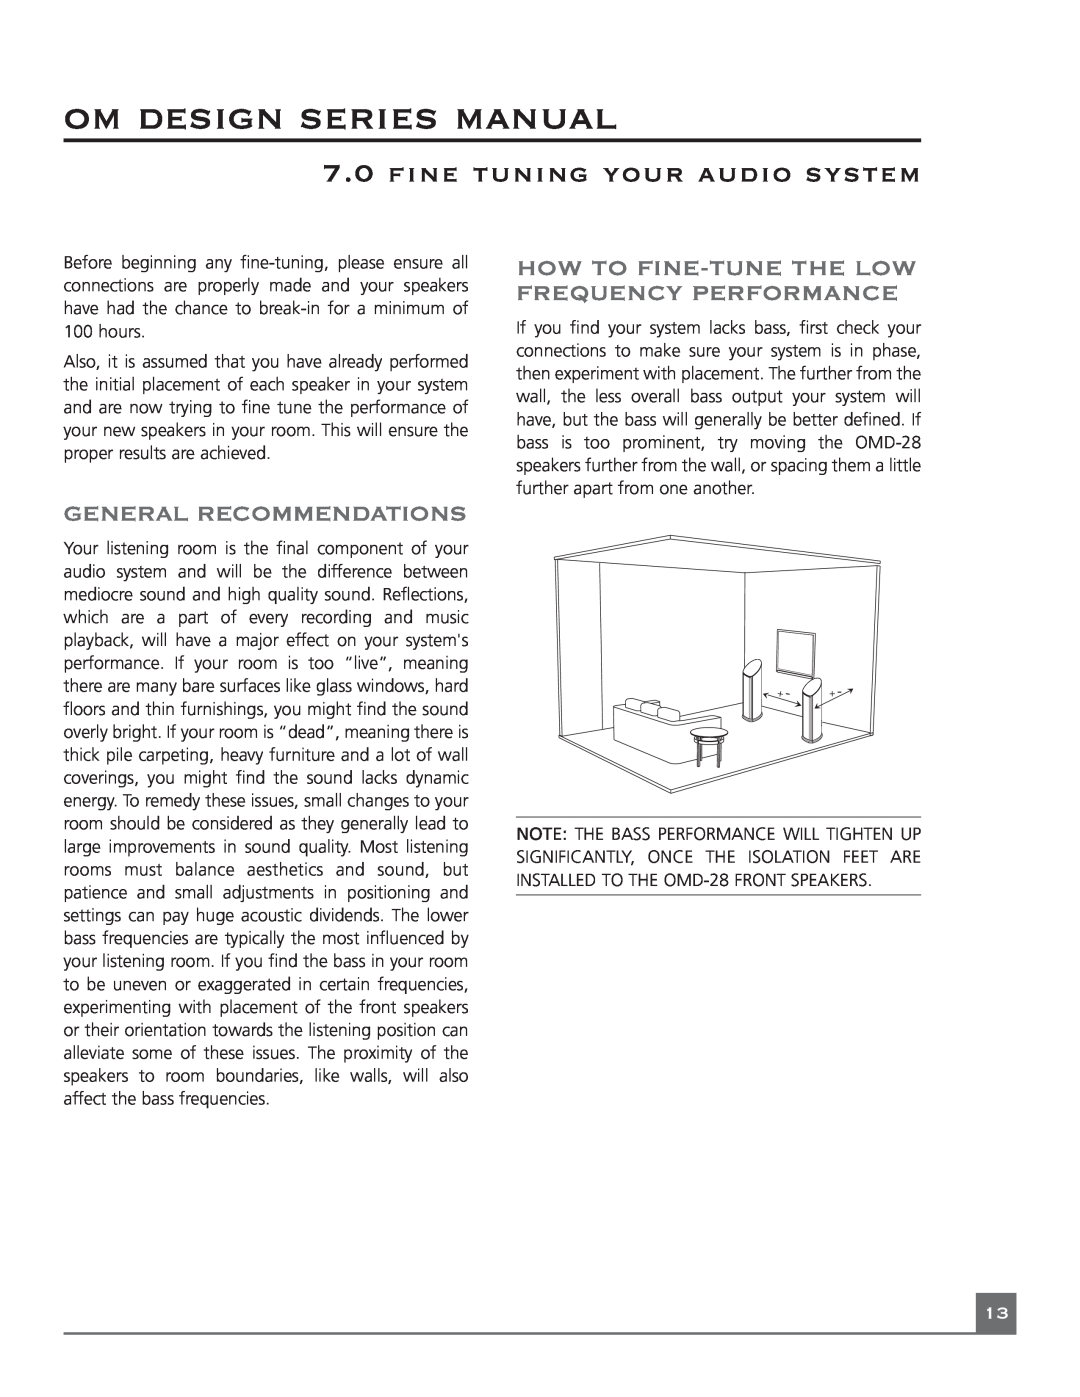 Mirage Loudspeakers OM DESIGN SERIES manual fine tuning your audio system, How To Fine-Tunethe Low Frequency Performance 